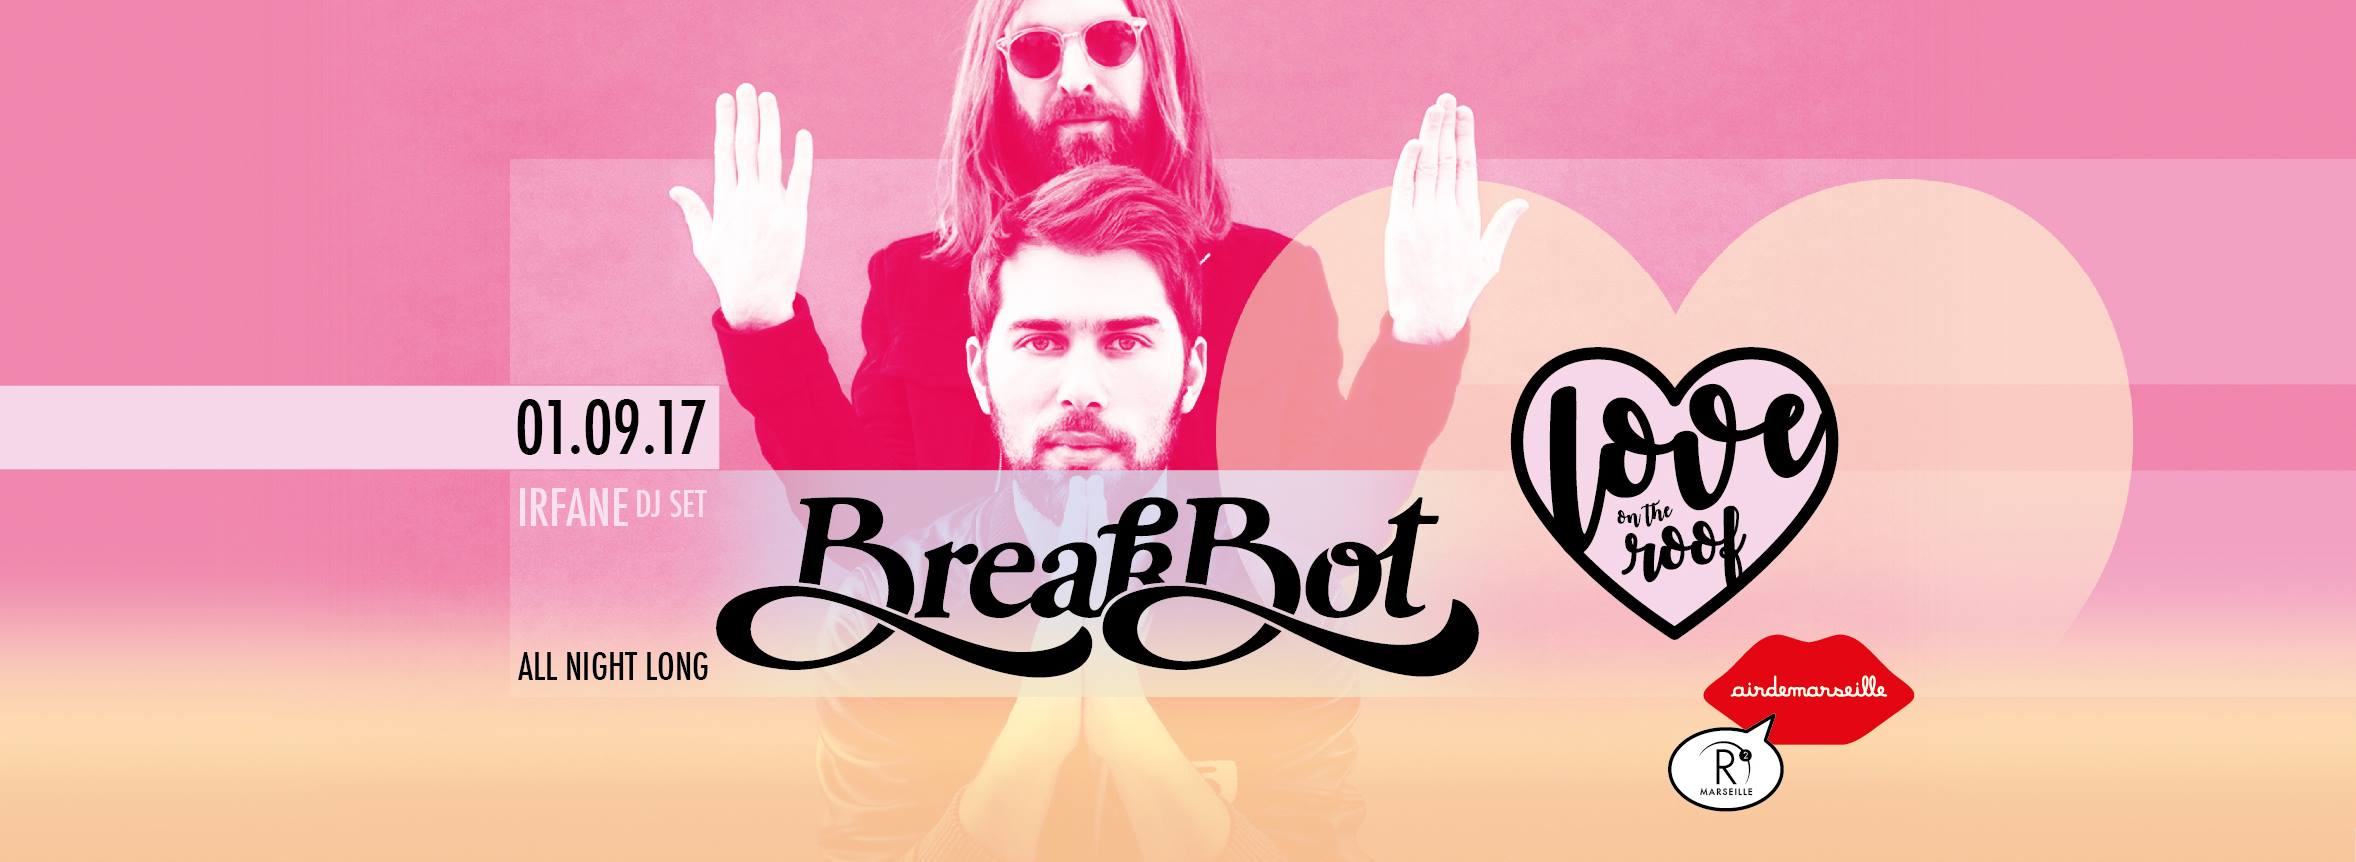 Breakbot All Night Long x Love On The Roof